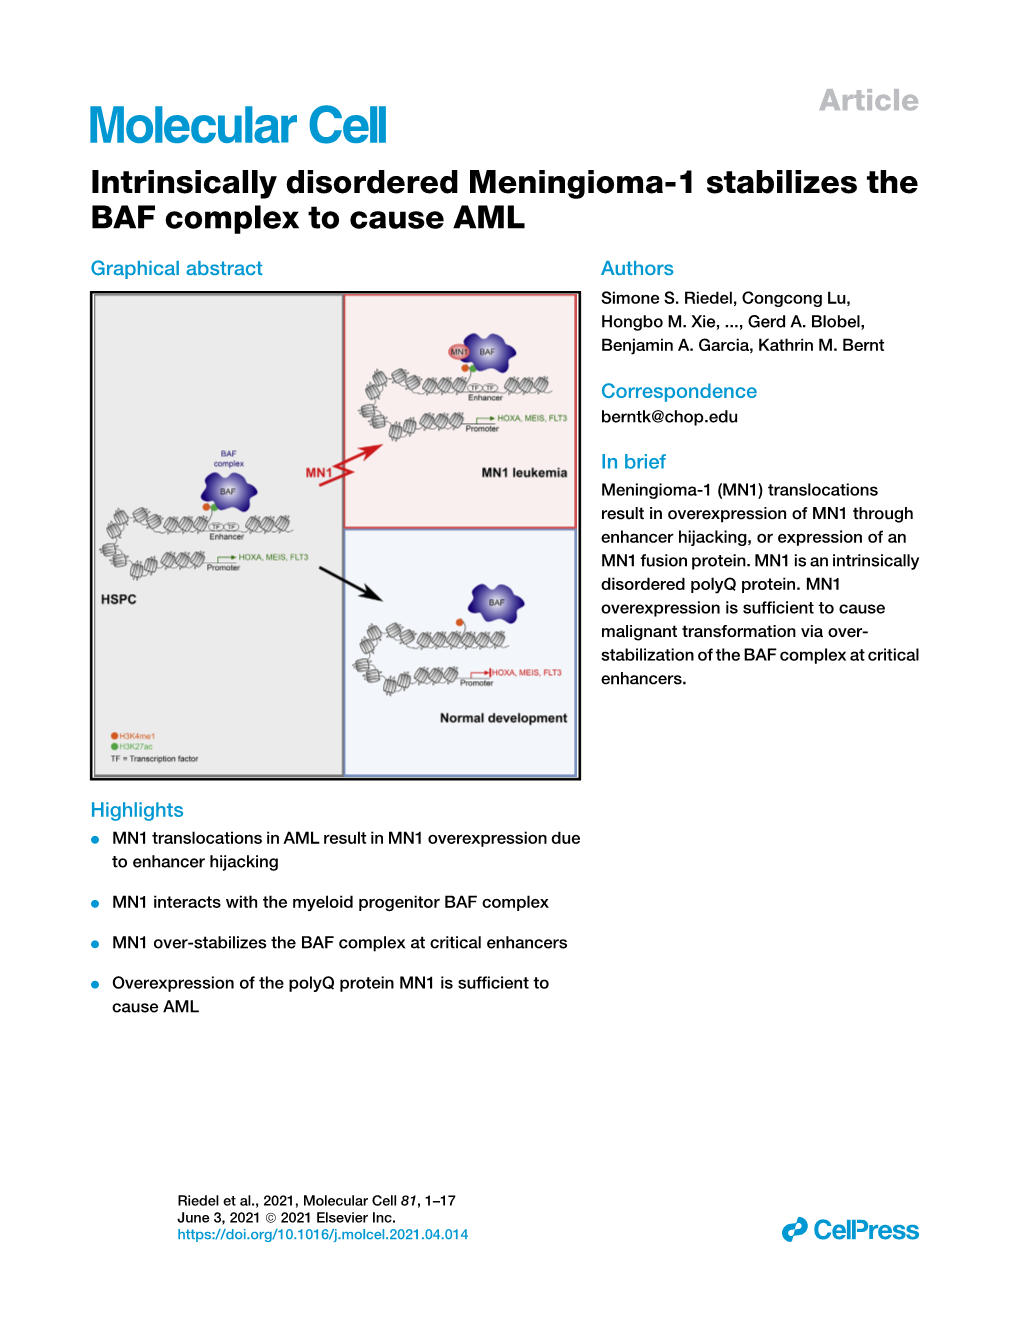 Intrinsically Disordered Meningioma-1 Stabilizes the BAF Complex to Cause AML